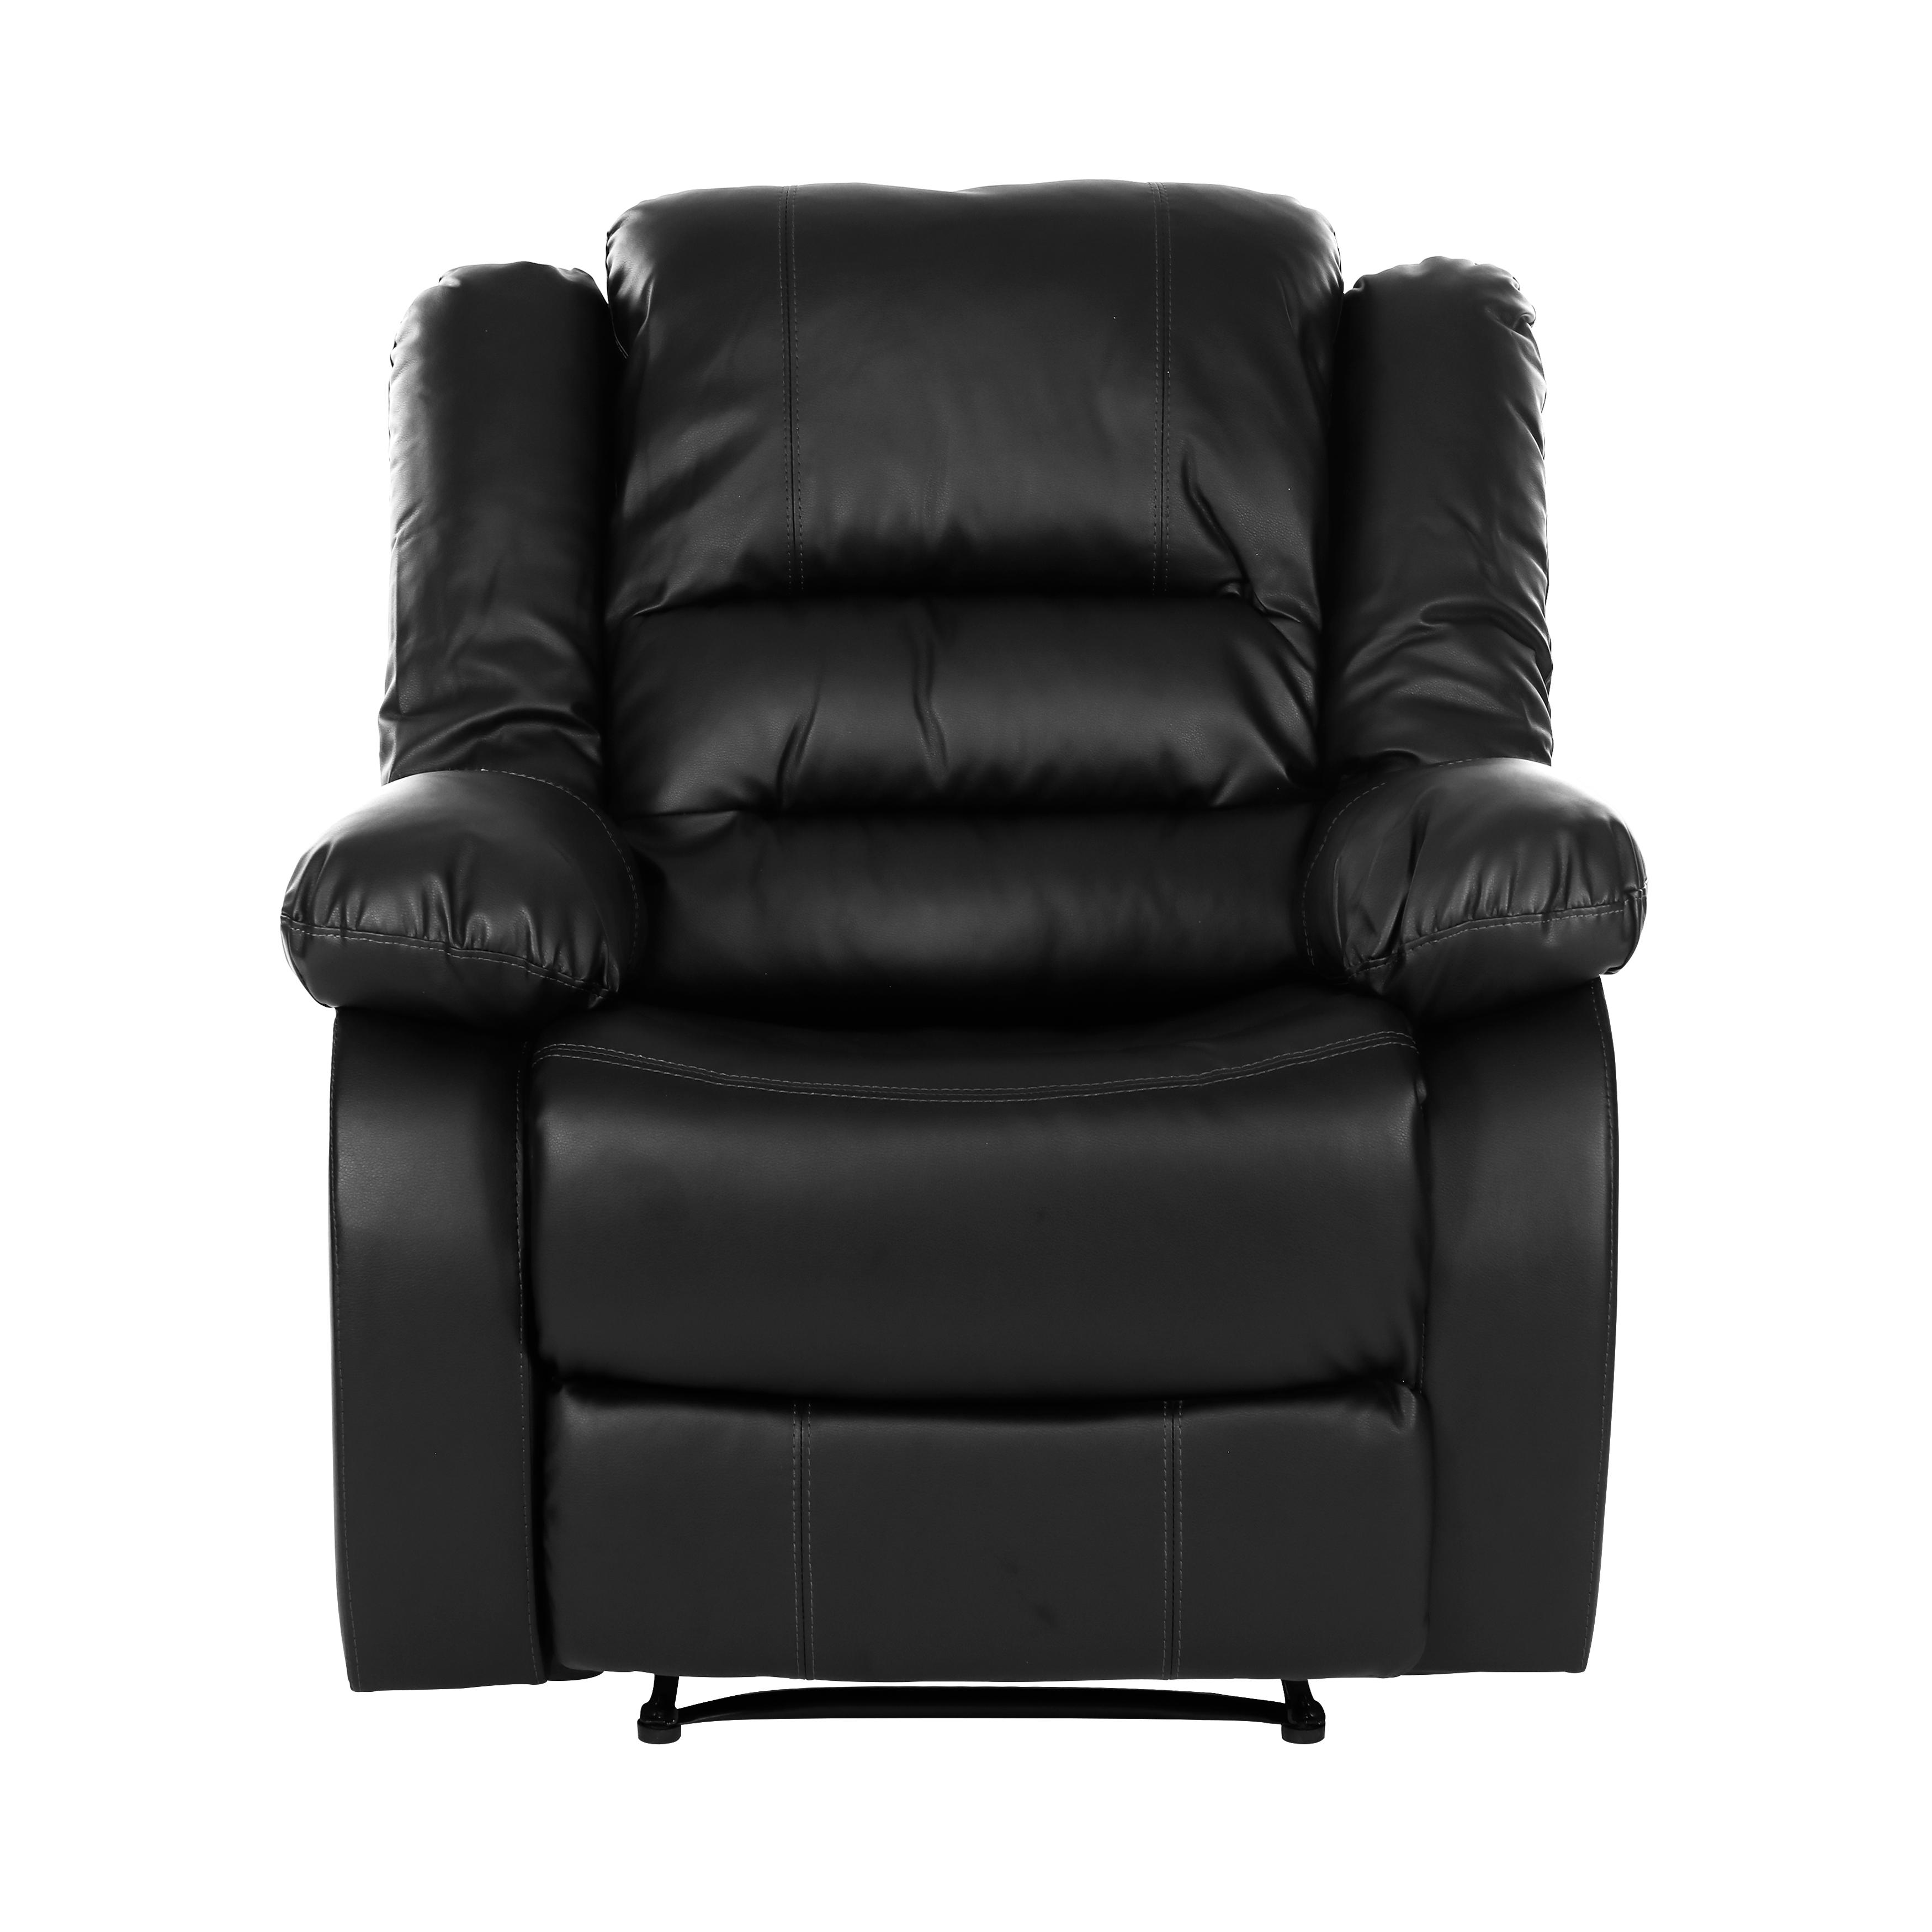 Transitional Recliner Chair Jarita Recliner Chair 8329BLK-1-C 8329BLK-1-C in Black Faux Leather